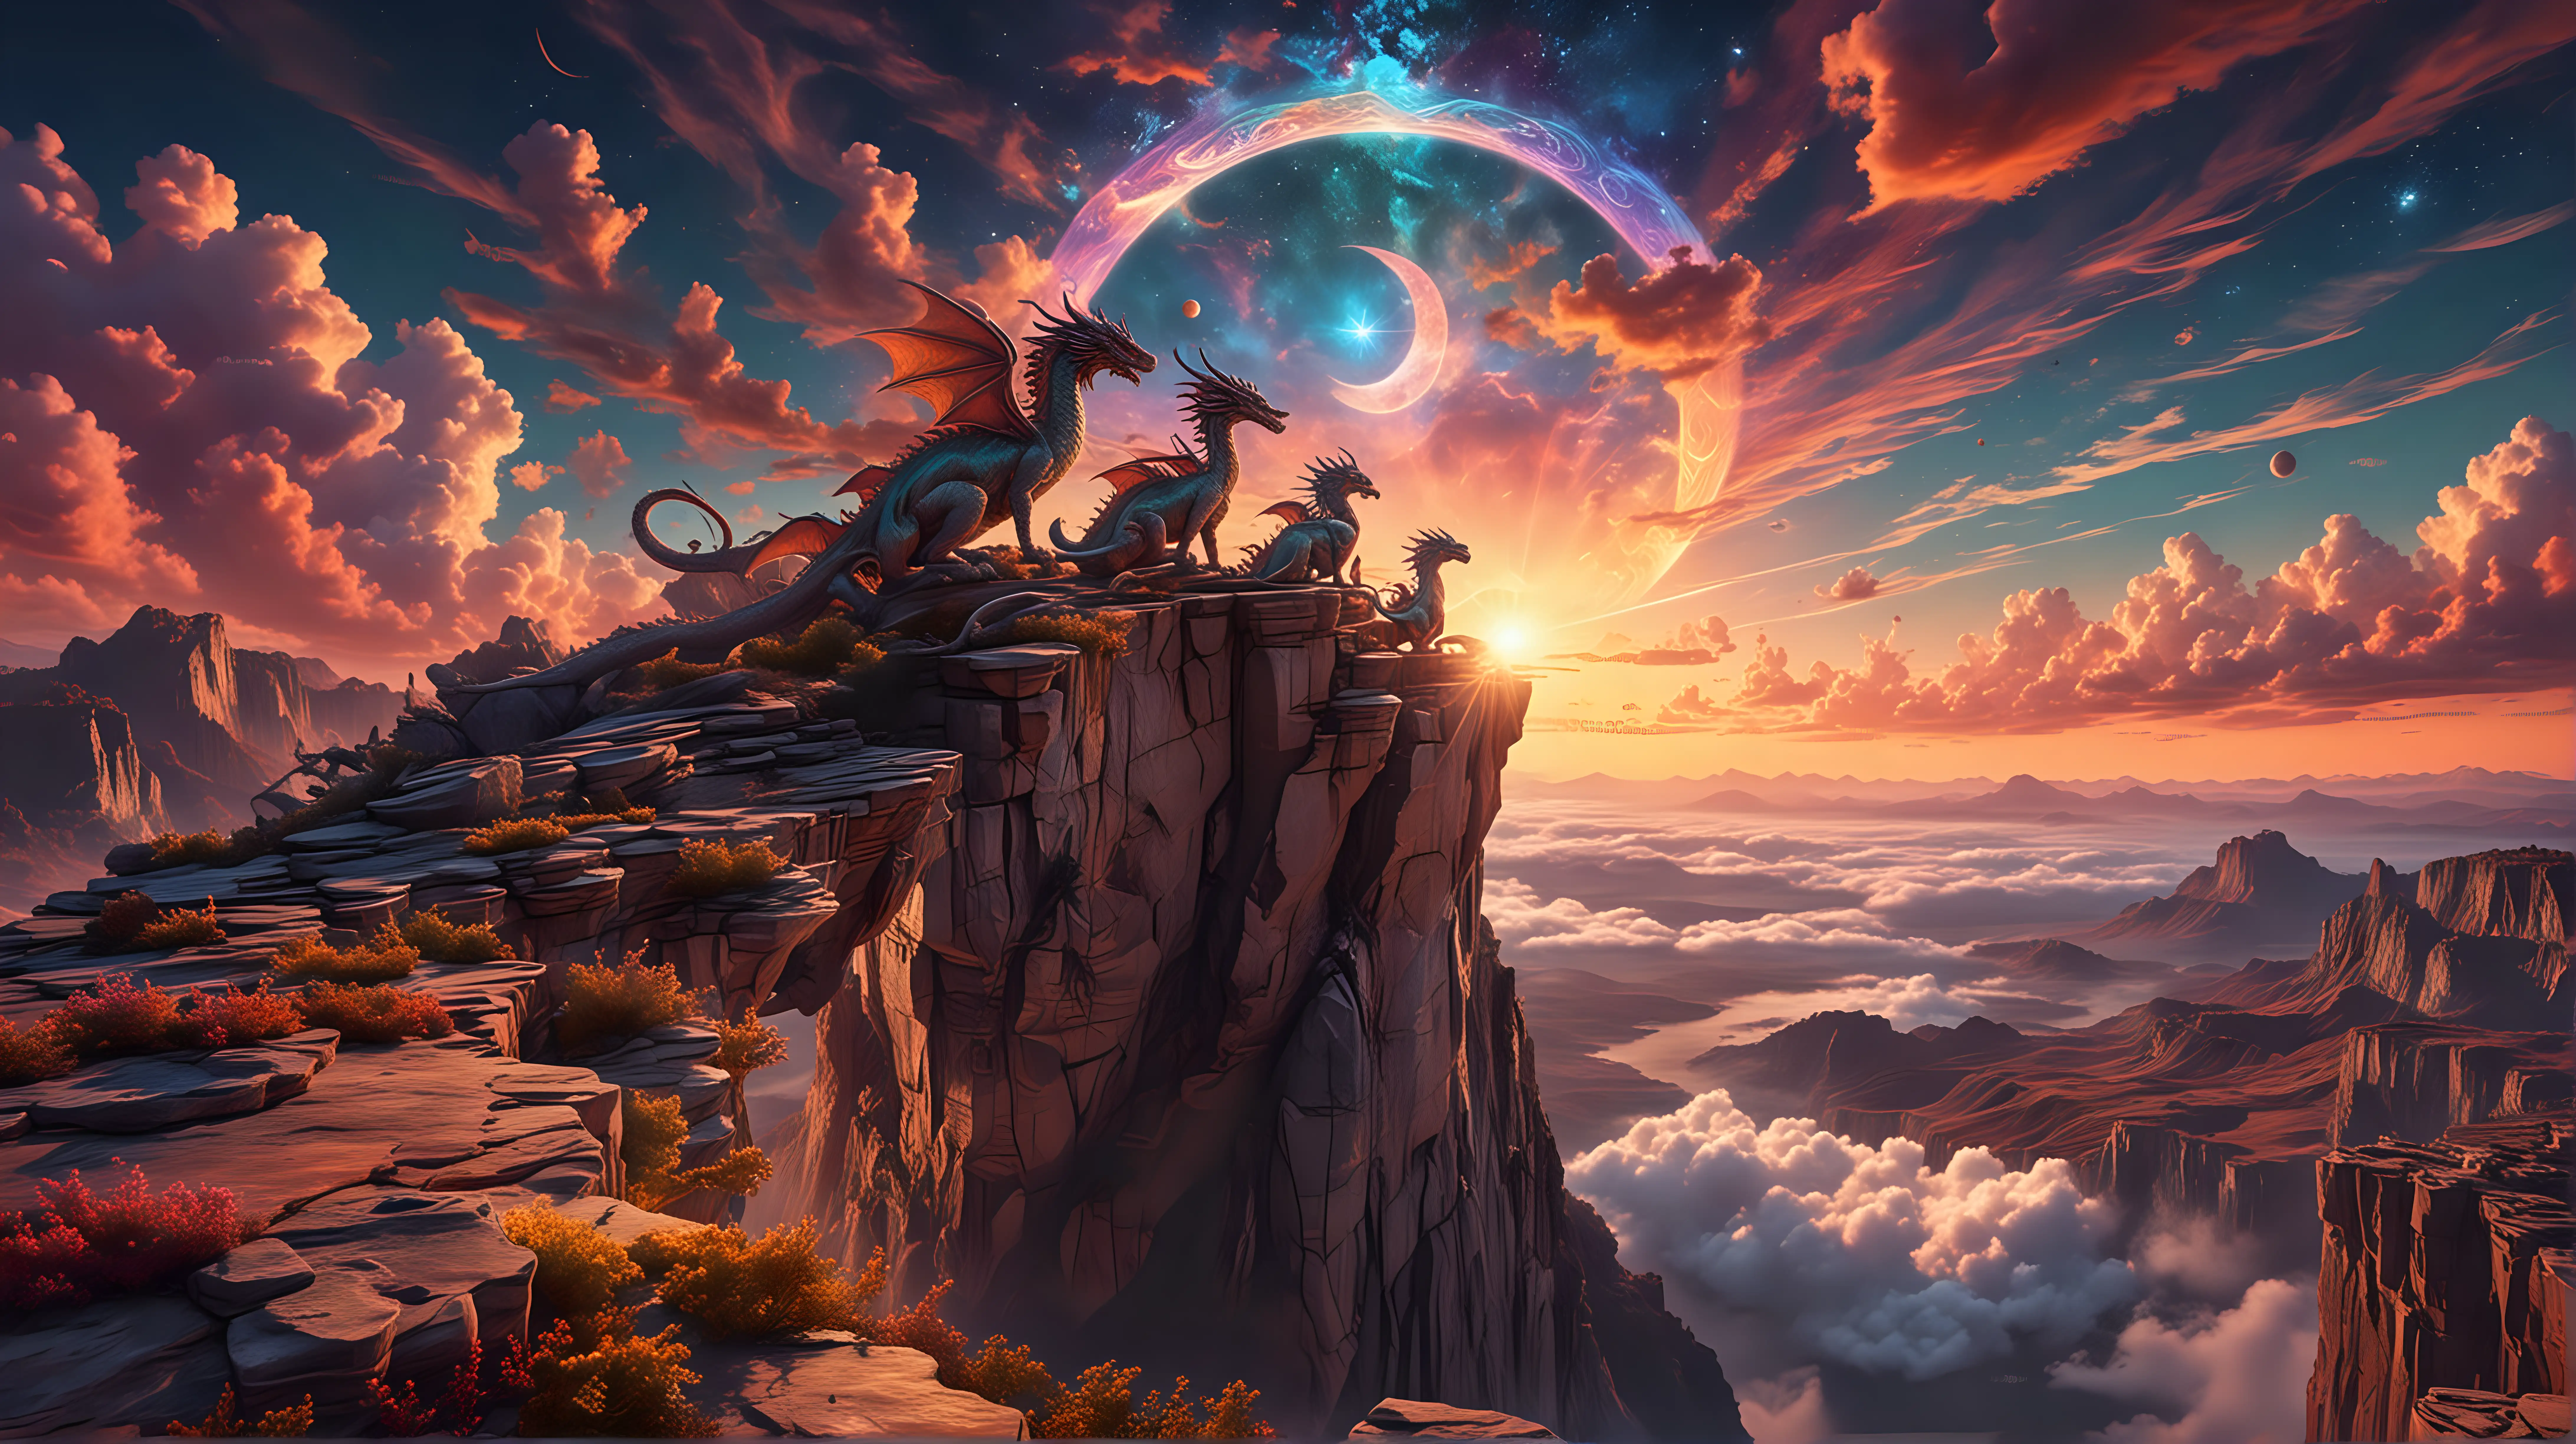 Psychedelic DMT visual on top of a scenic cliff on the edge of the universe at sunset with both the sun and moon visible. The clouds are shaped like dragons